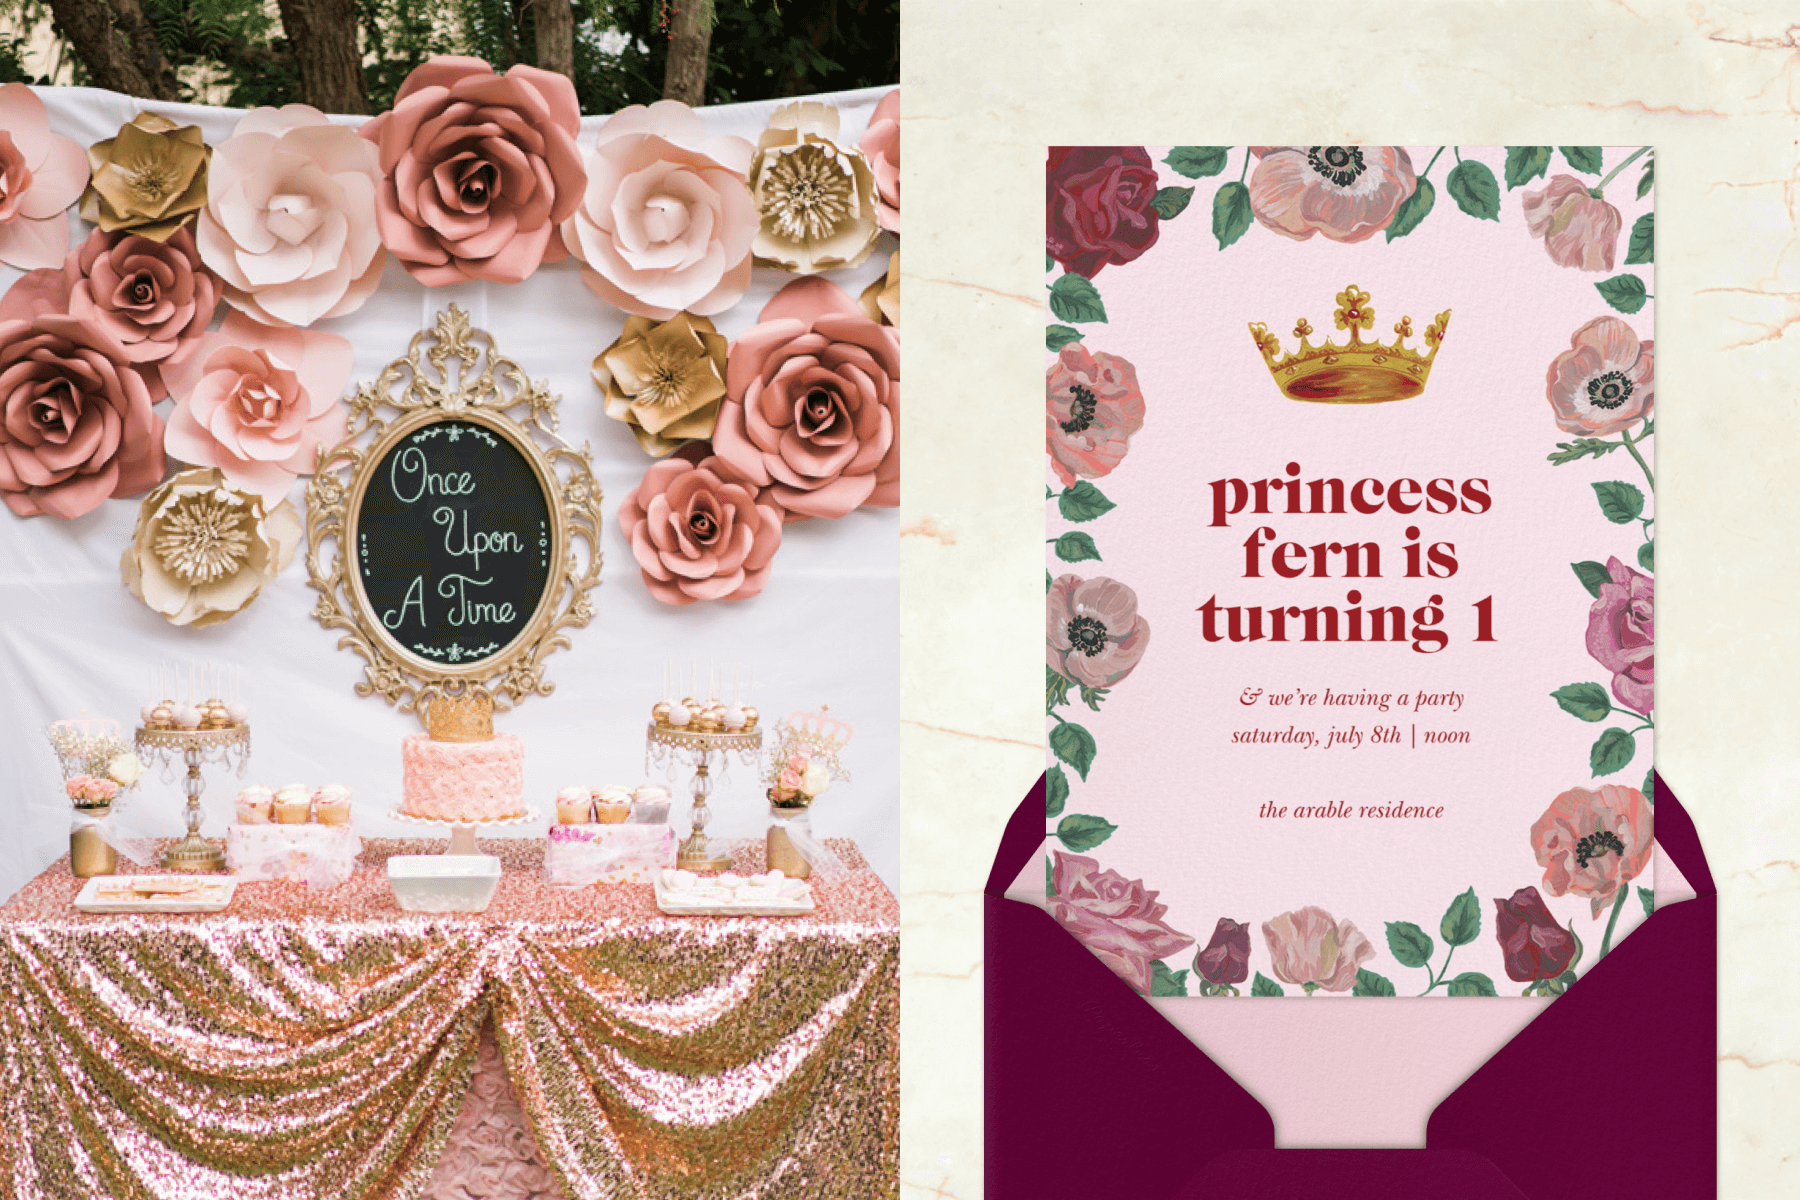 Left: A table set for a very pink party with a pink glitter tablecloth, cake, and desserts, beneath large pink rose decorations and an ornate gold mirror frame with “Once Upon a Time” written in the center. Right: A pink card with poppies along the border and a gold crown in the center reads “Princess Fern is turning one.”